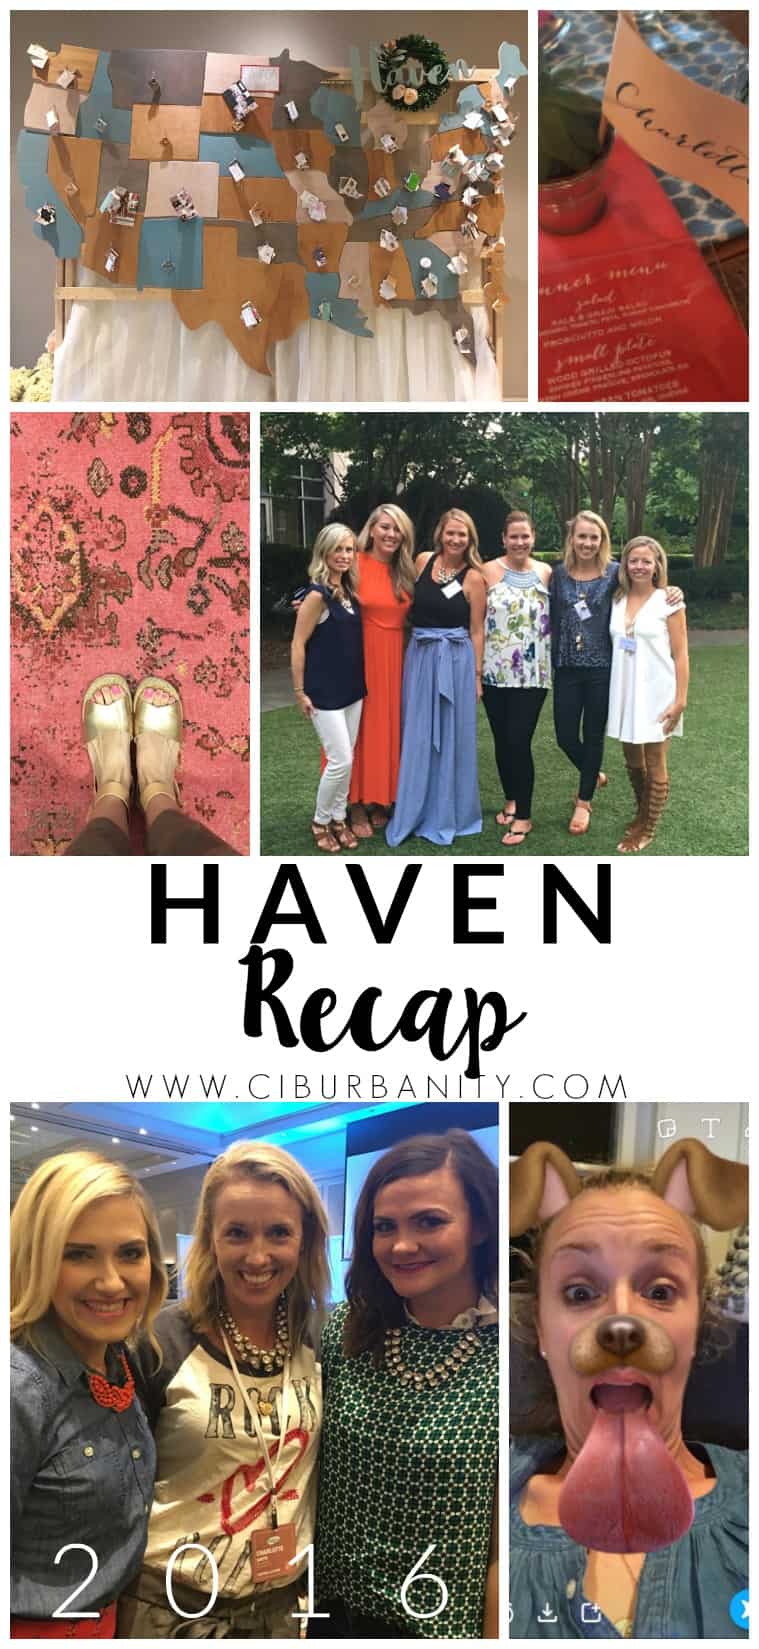 Friends and things I learned at the Haven Conference.